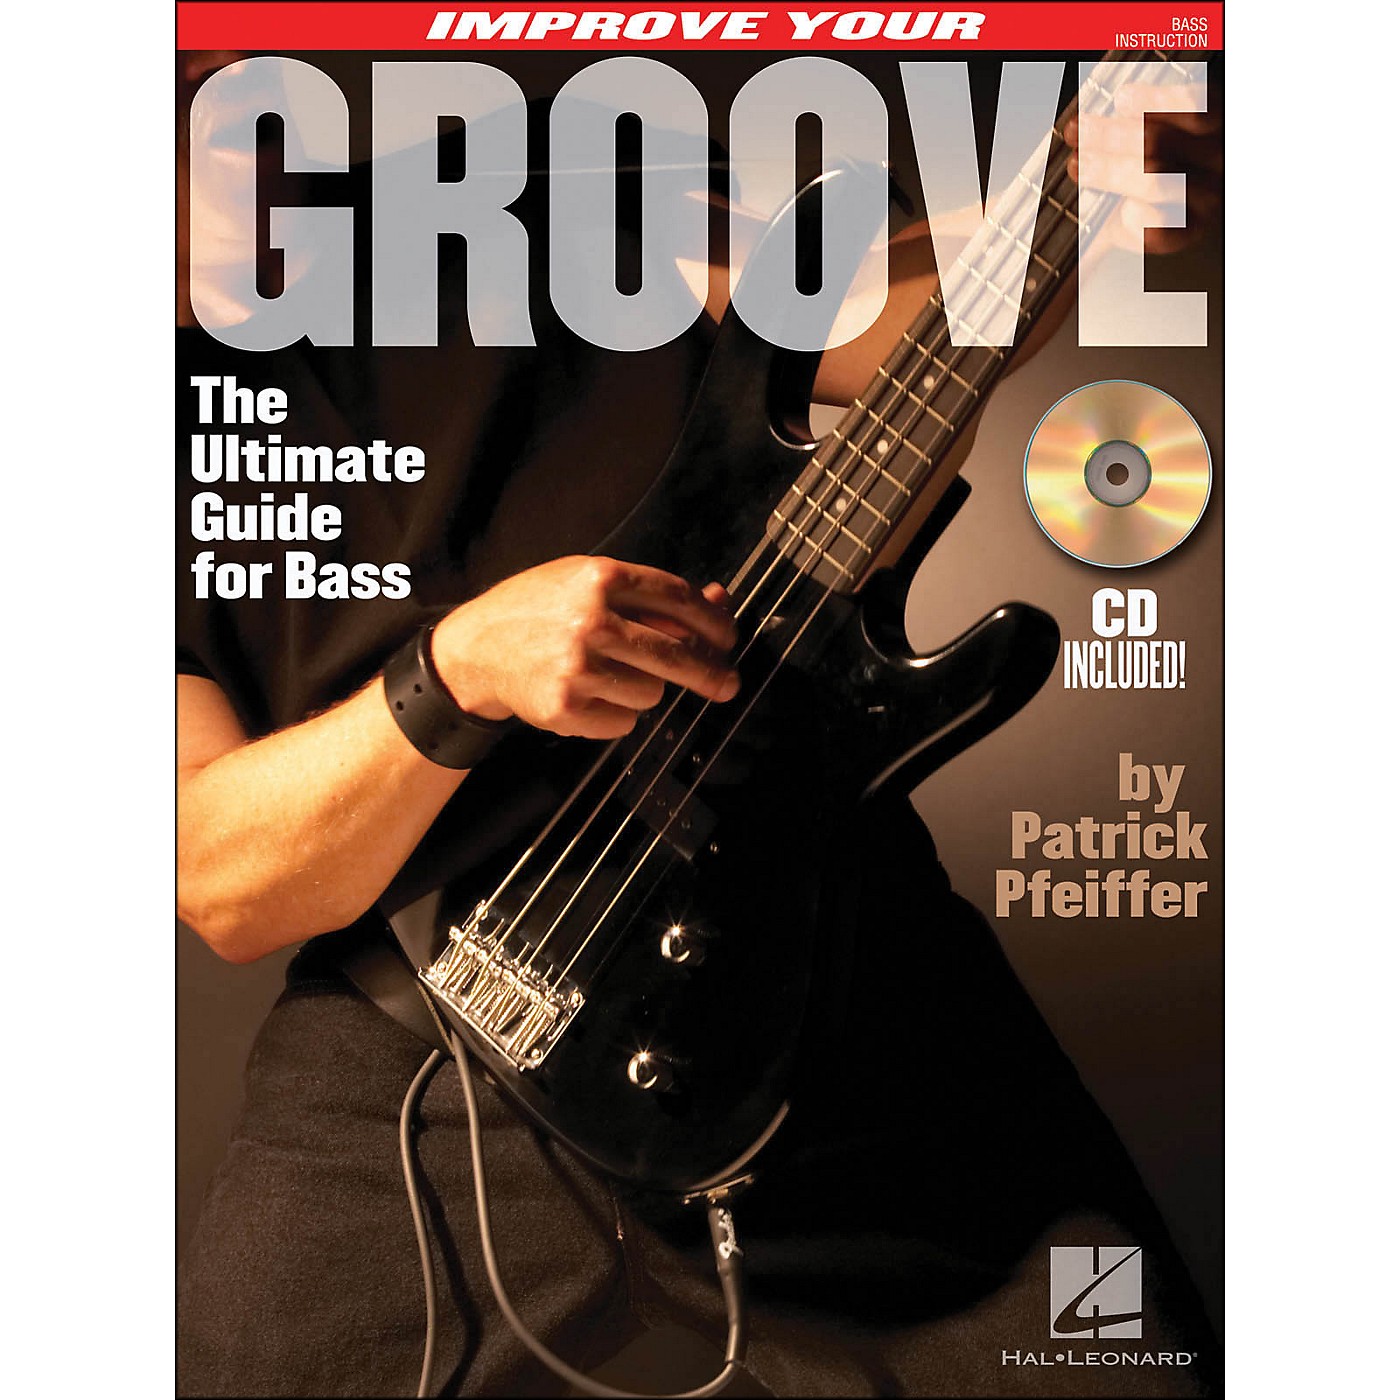 Hal Leonard Improve Your Groove (The Ultimate Guide for Bass) Book/CD thumbnail